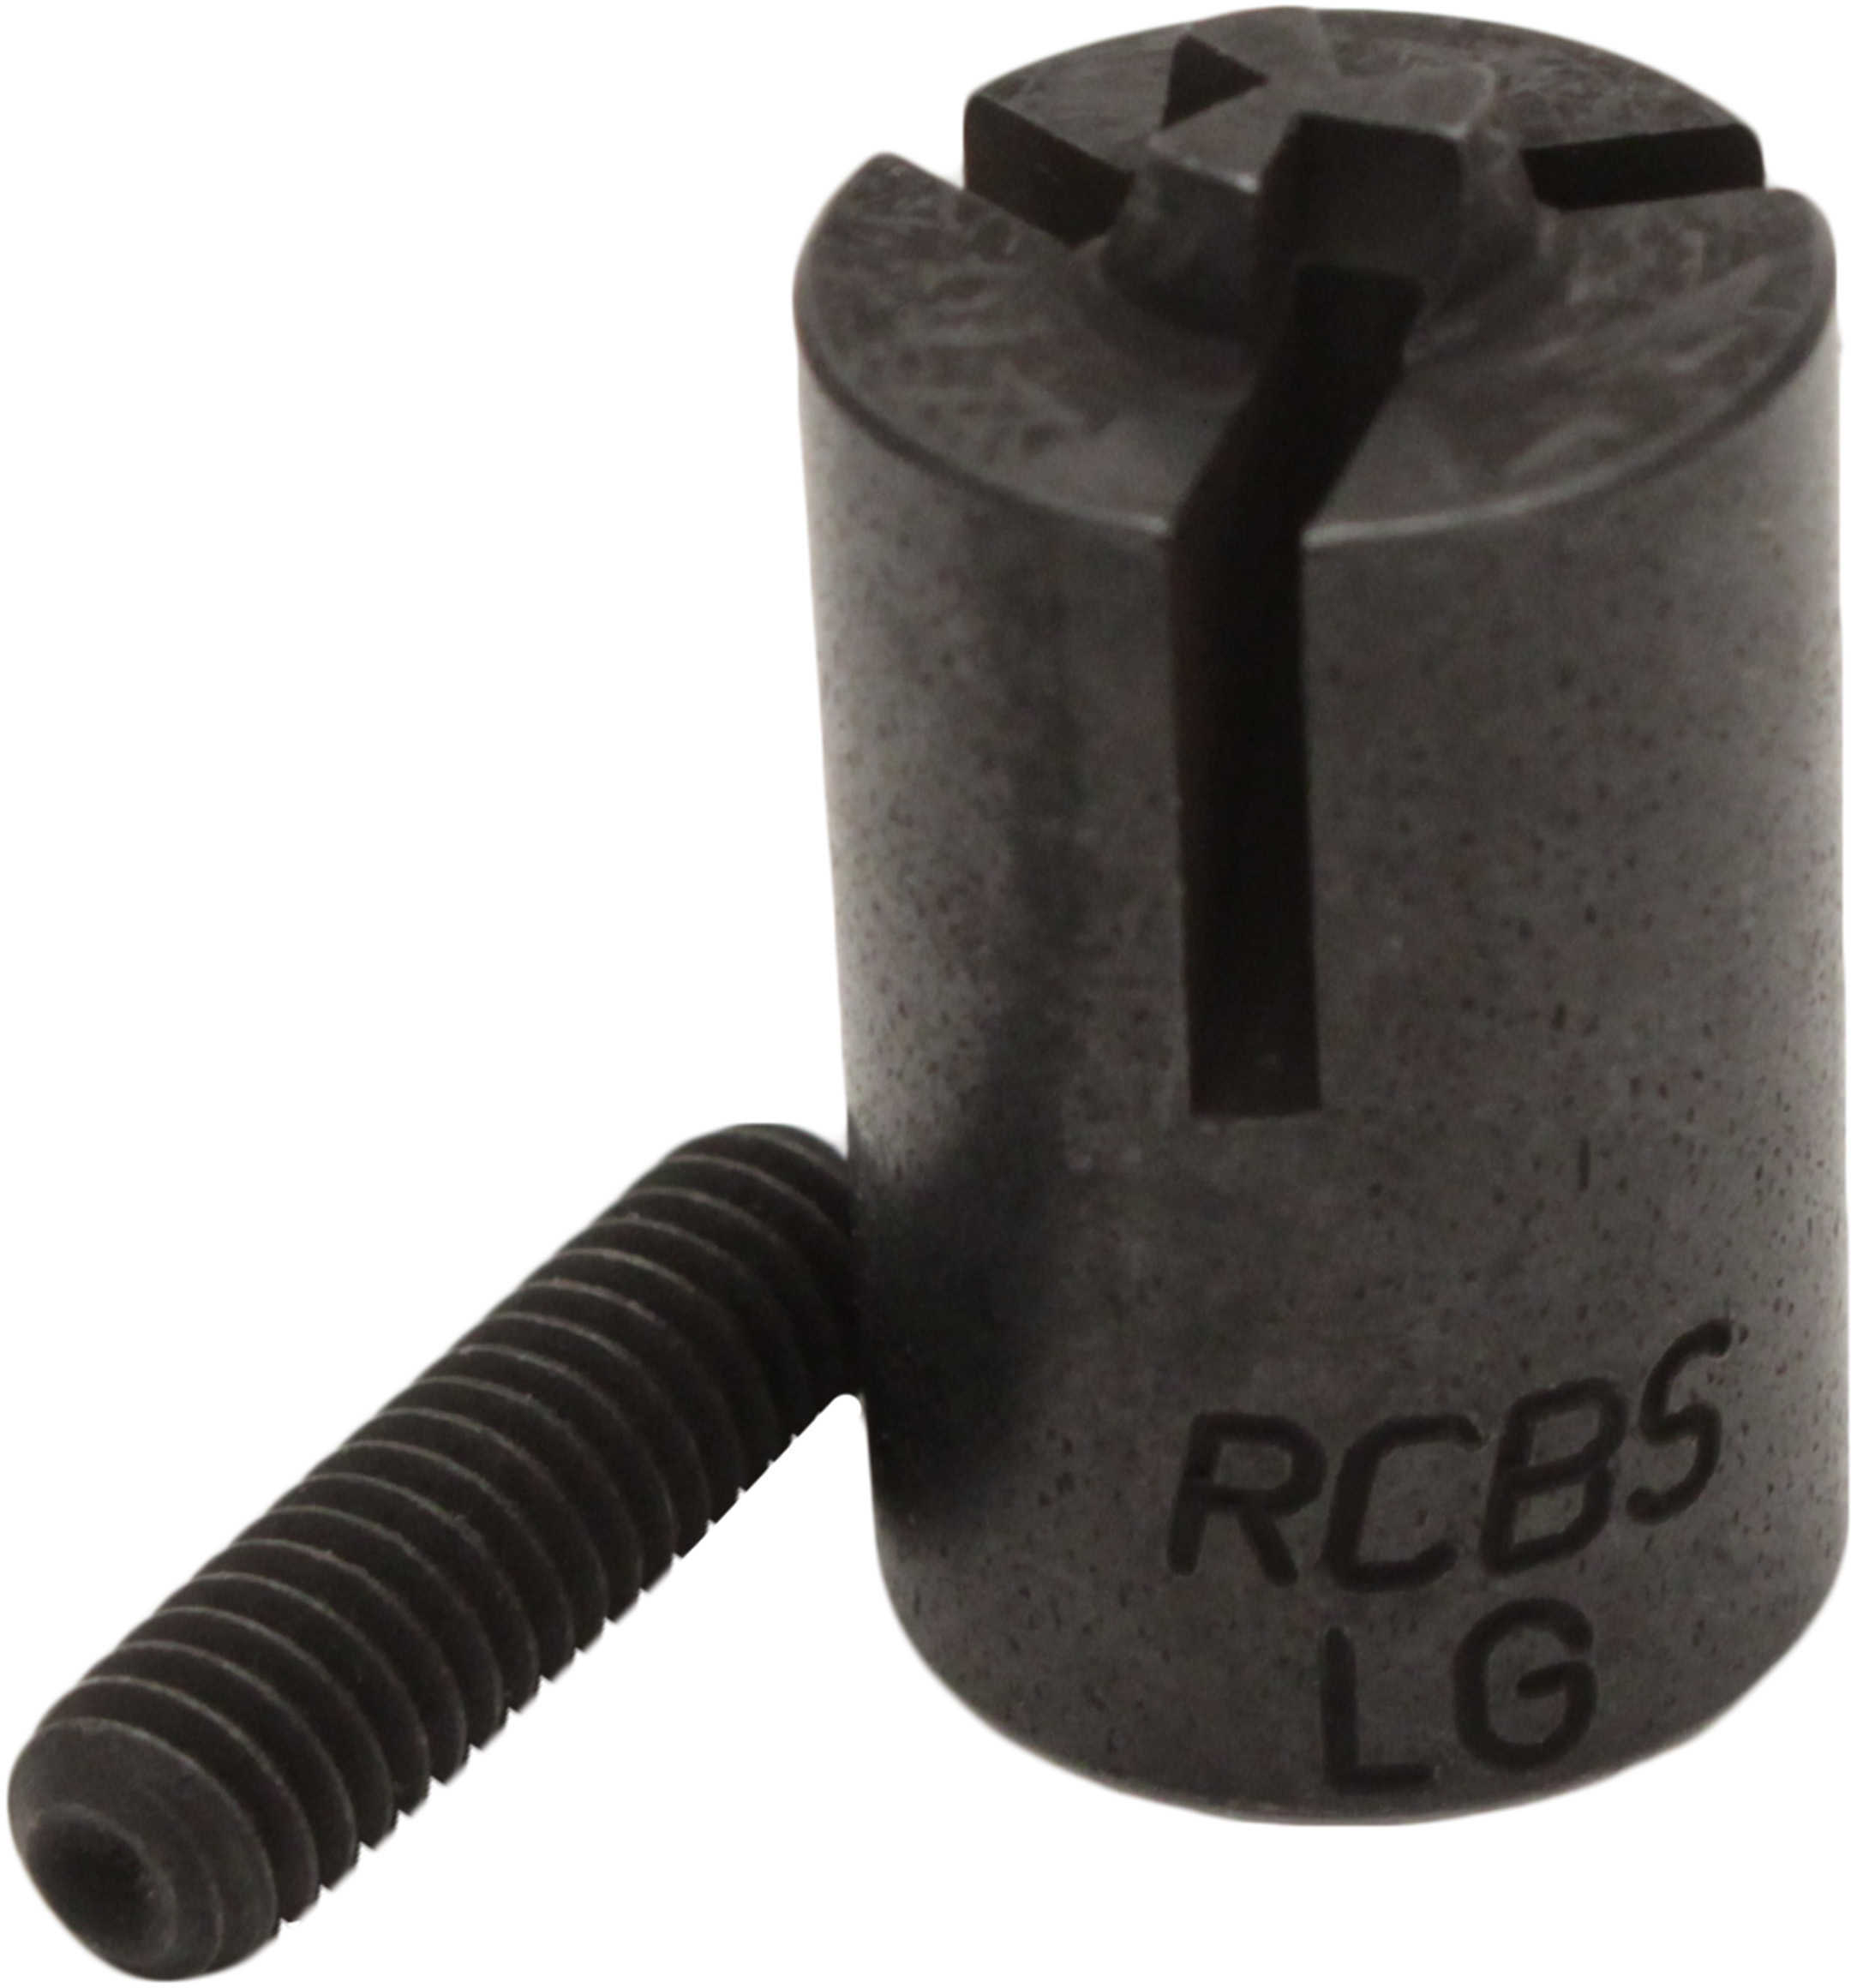 RCBS Military Crimp Remover 1 Large 90387